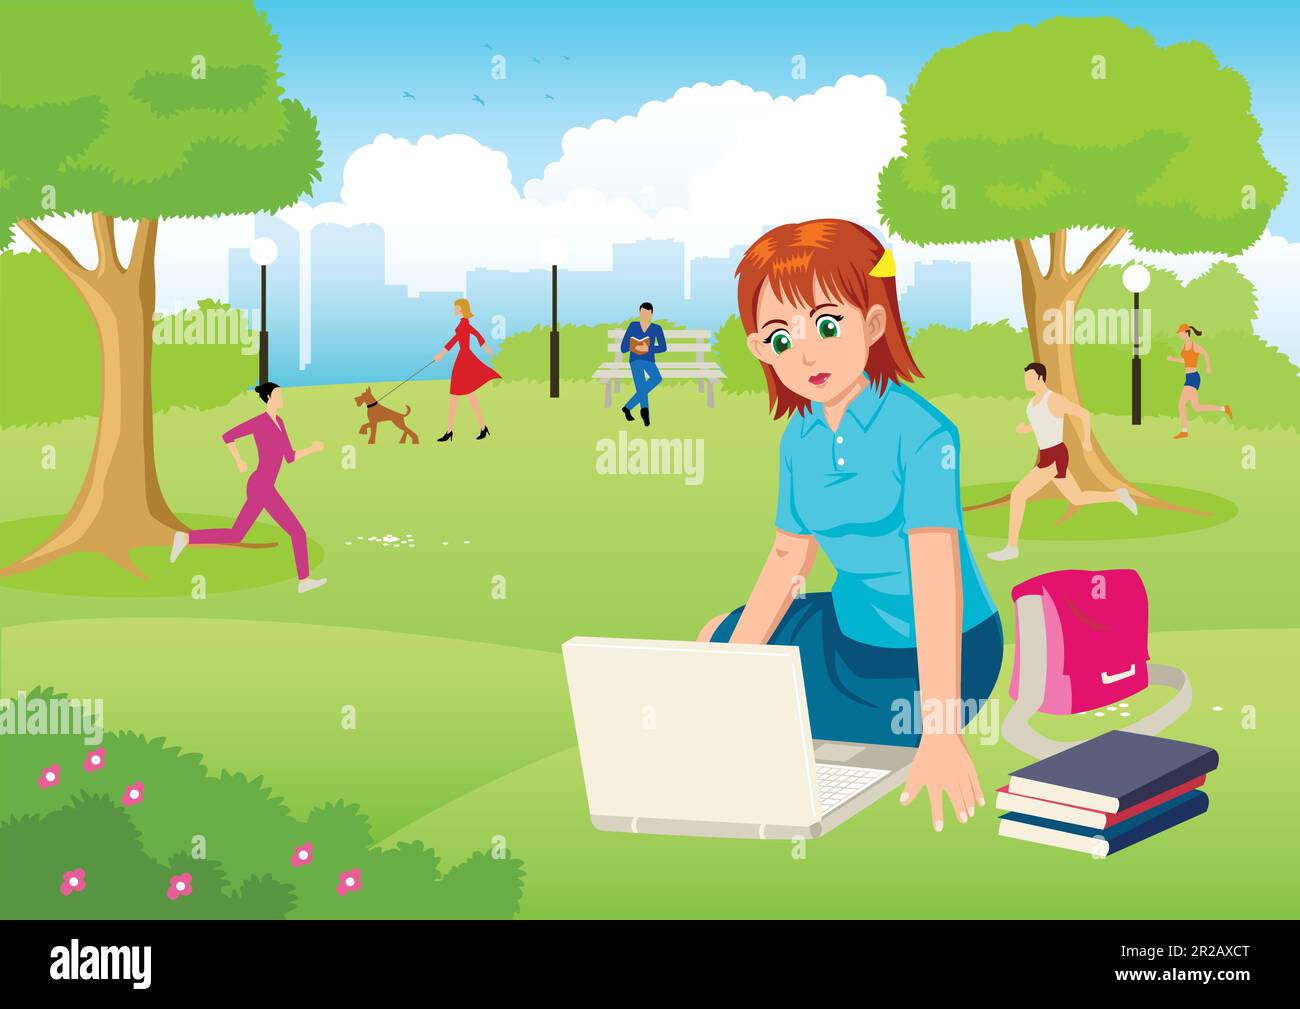 Cartoon illustration of a girl working with lap top in the city park Stock Vector